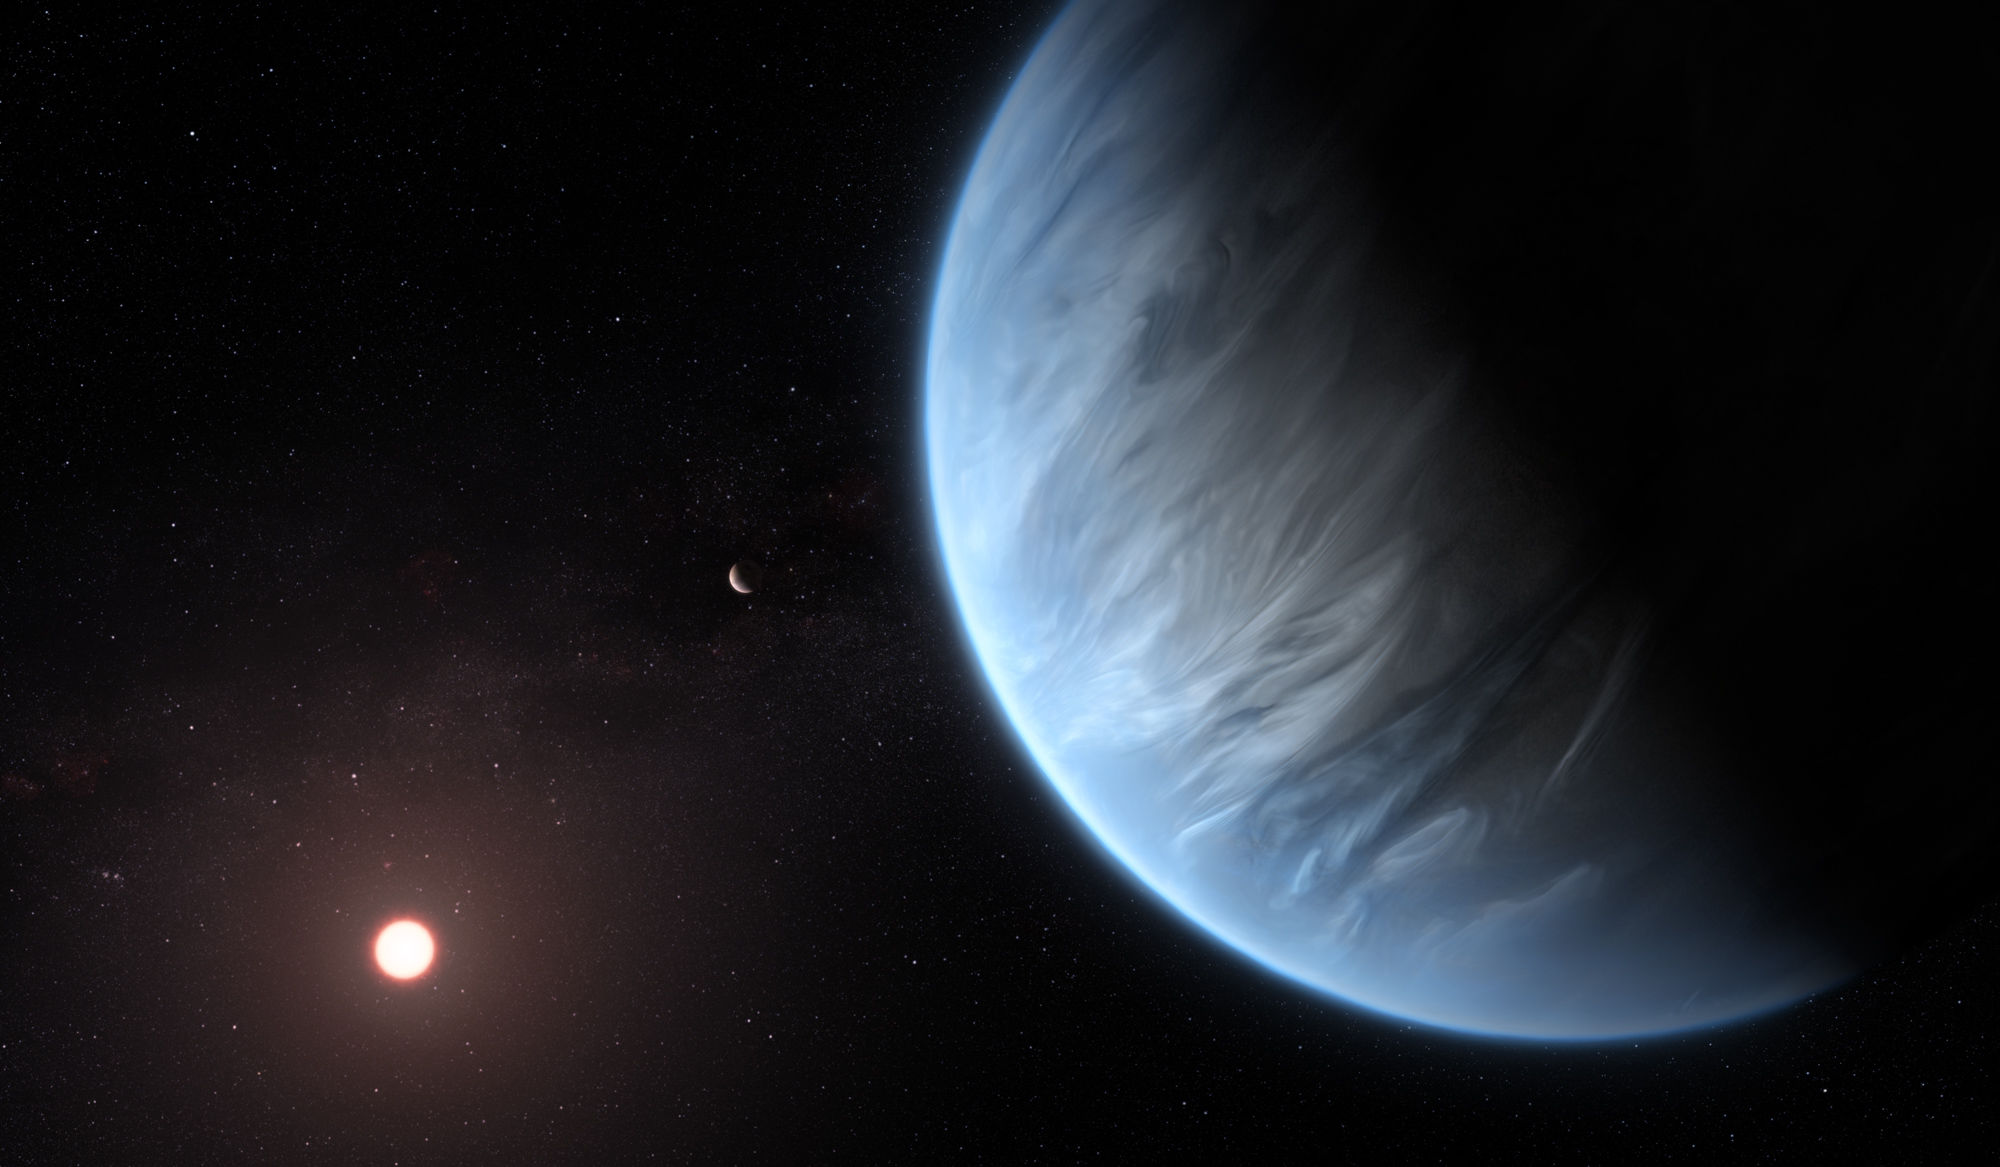 Artwork depicting the mini-Neptune exoplanet K2-18b, recently discovered to have water vapor in its atmosphere. Credit: ESA/Hubble, M. Kornmesser